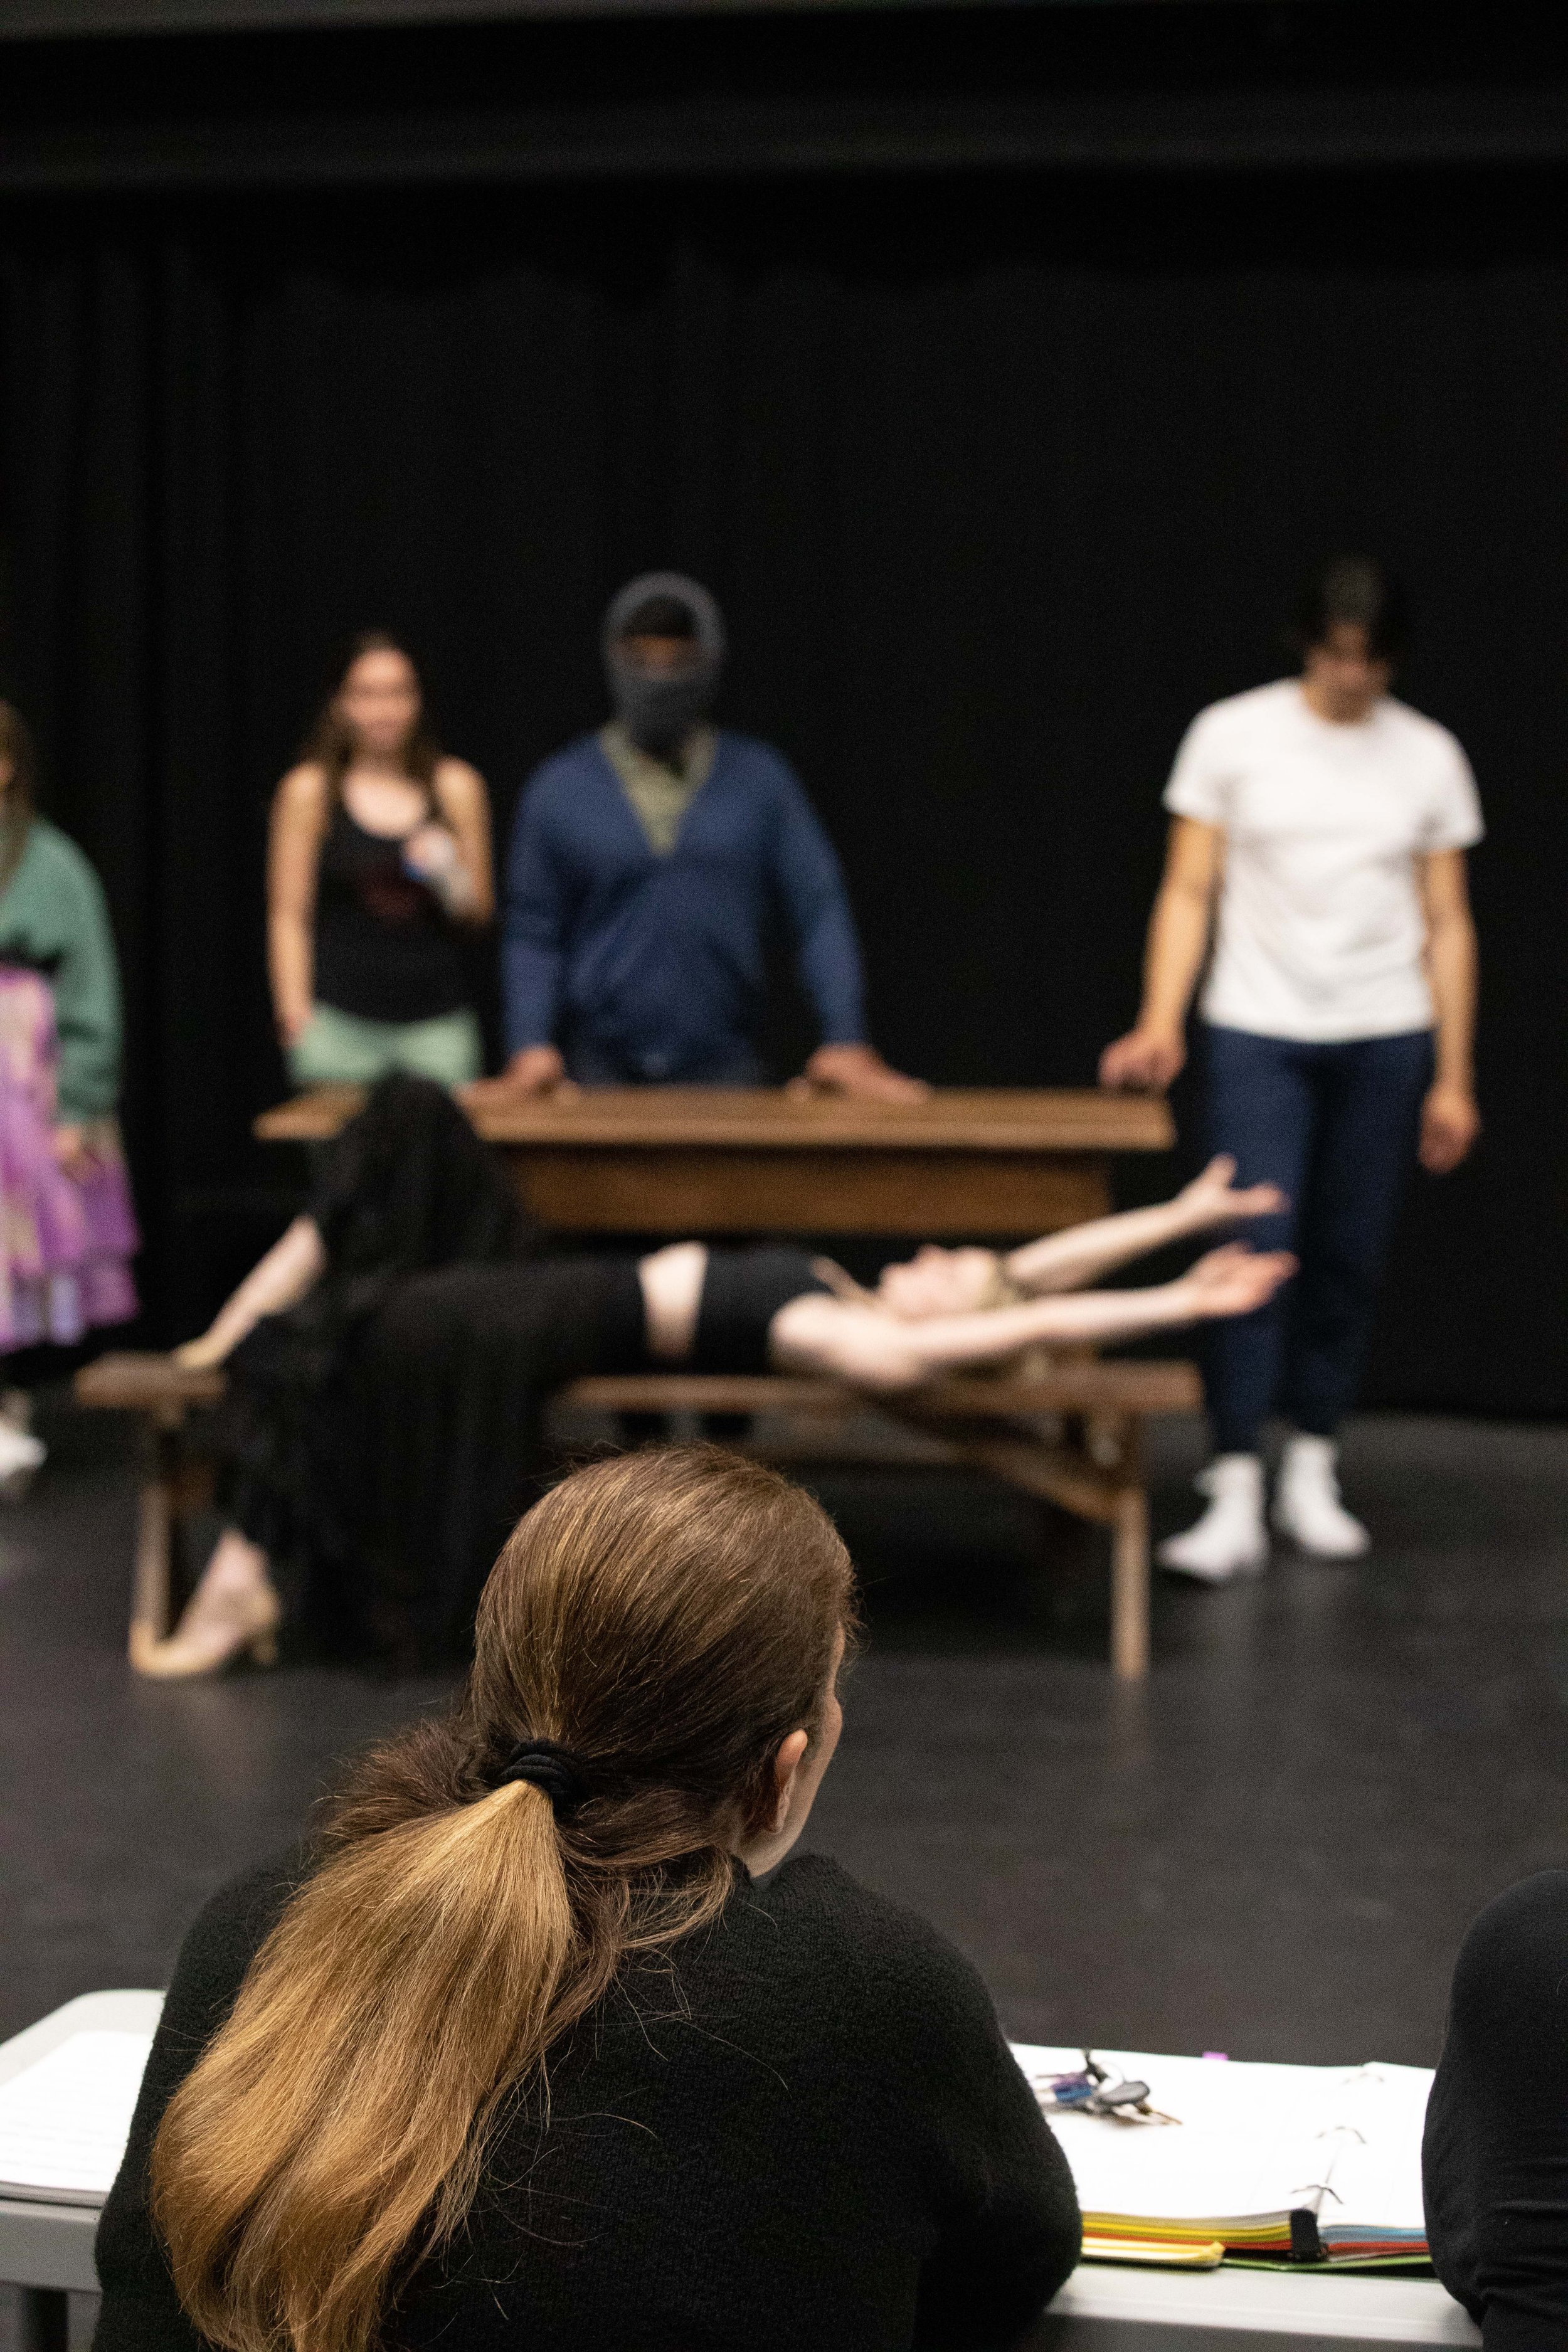  SMC theater students listening to instructions while Teacher Perviz Sawoski (foreground) speaks at a class rehearsal for the musical “Hunchback of Notredame”. Theater Arts building at SMC main campus, Santa Monica, Calif. March Tuesday 7, 2023. (Jor